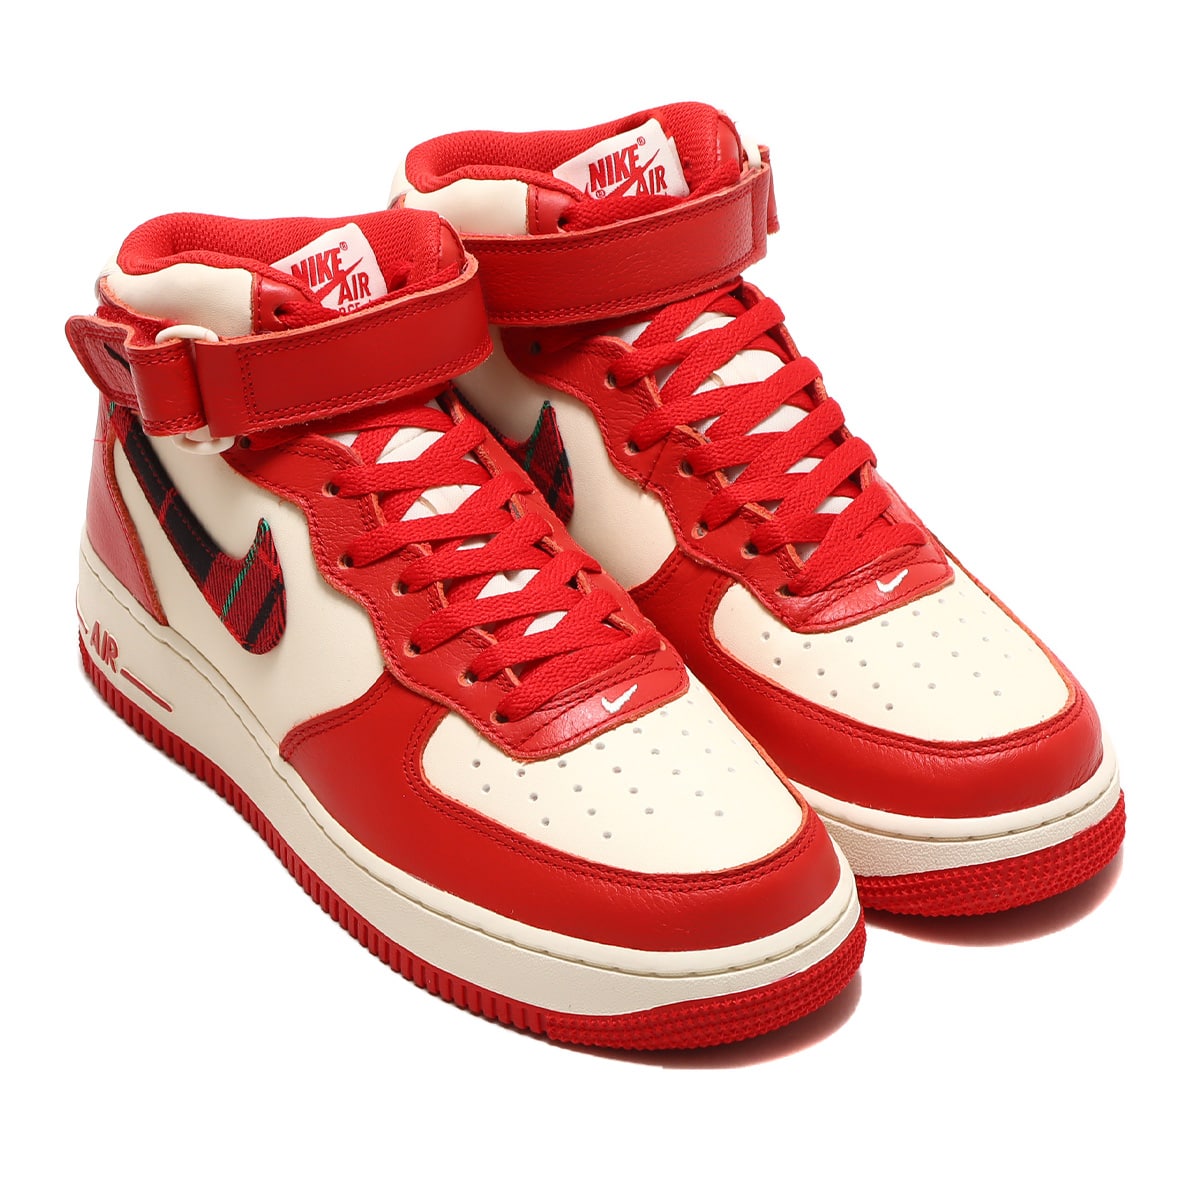 NIKE AIR FORCE 1 MID '07 LX PALE IVORY/UNIVERSITY RED-BLACK 23SP-I